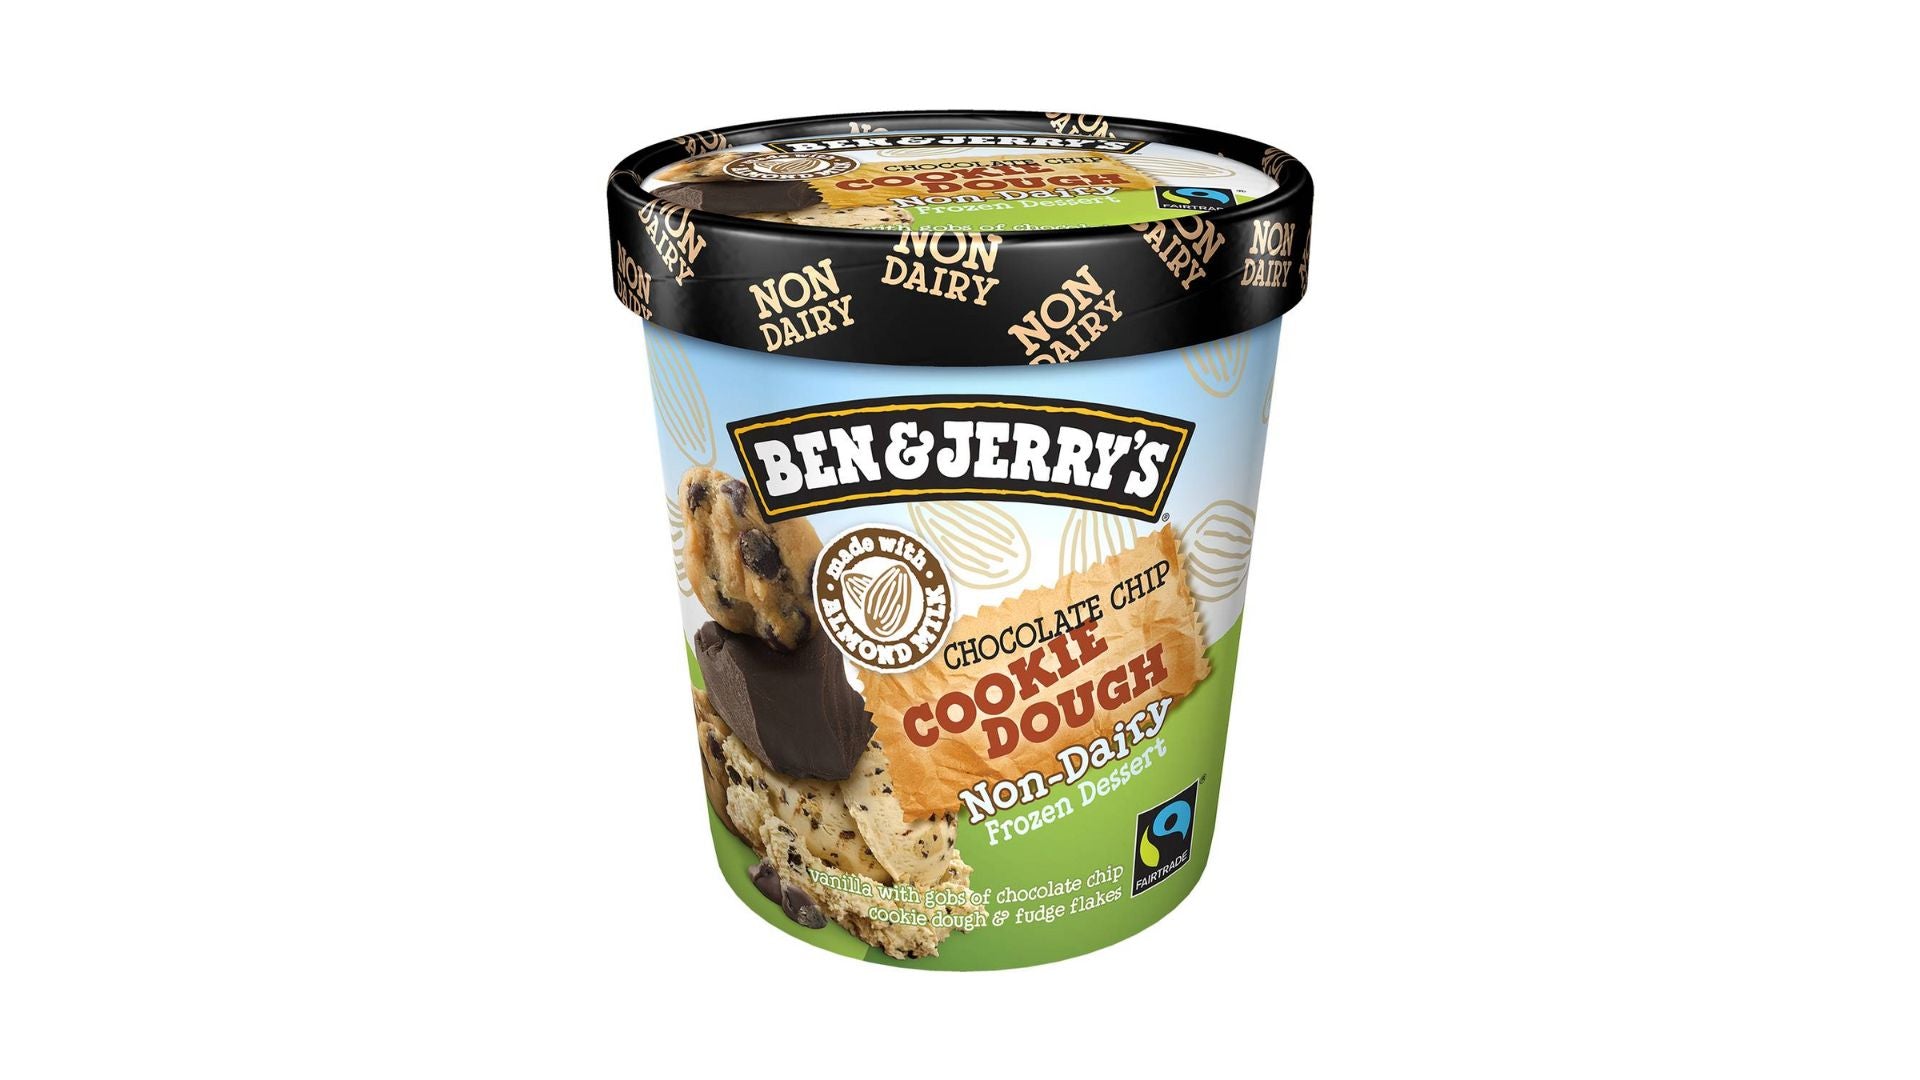 Ben & Jerry's Non-Dairy Chocolate Chip Cookie Dough 458ml